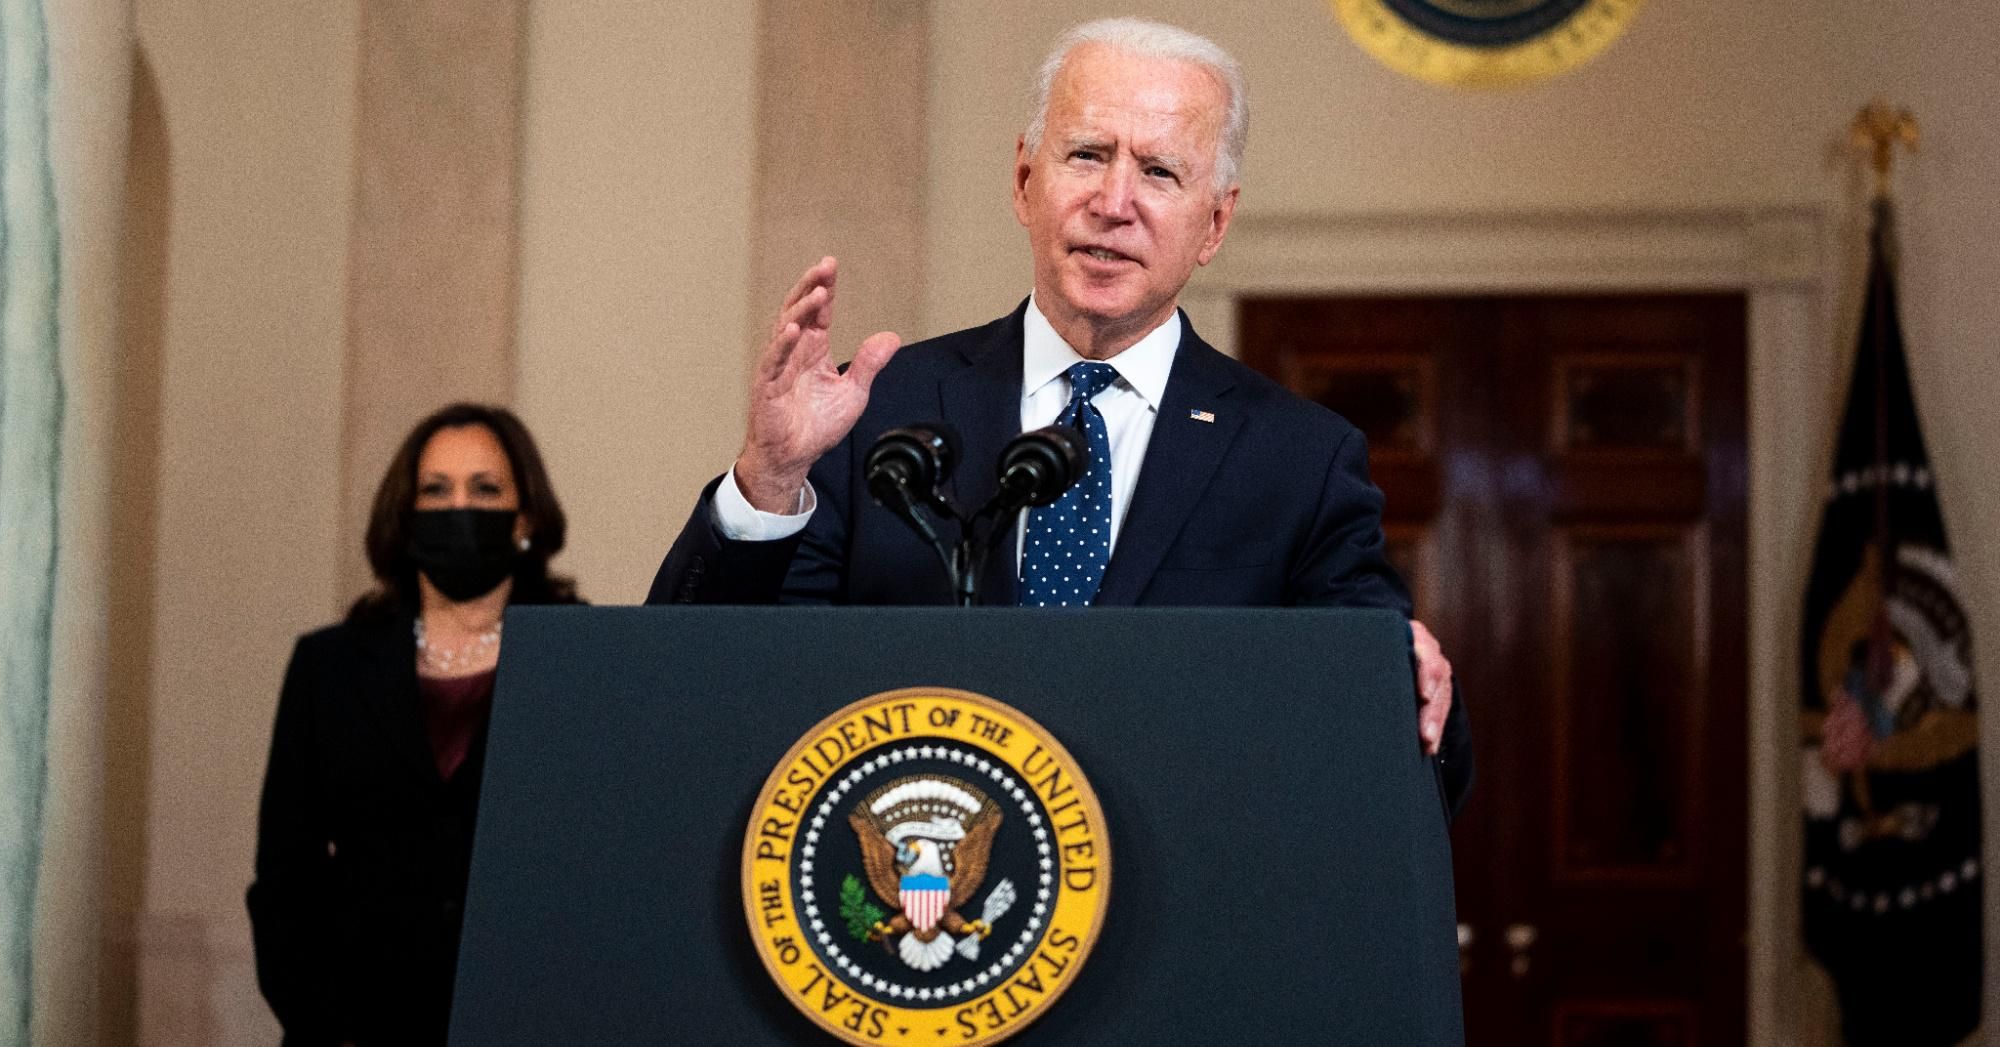 U.S. President Joe Biden delivers remarks at the Cross Hall of the White House April 20, 2021 in Washington, D.C. (Photo: Doug Mills/Pool/Getty Images)